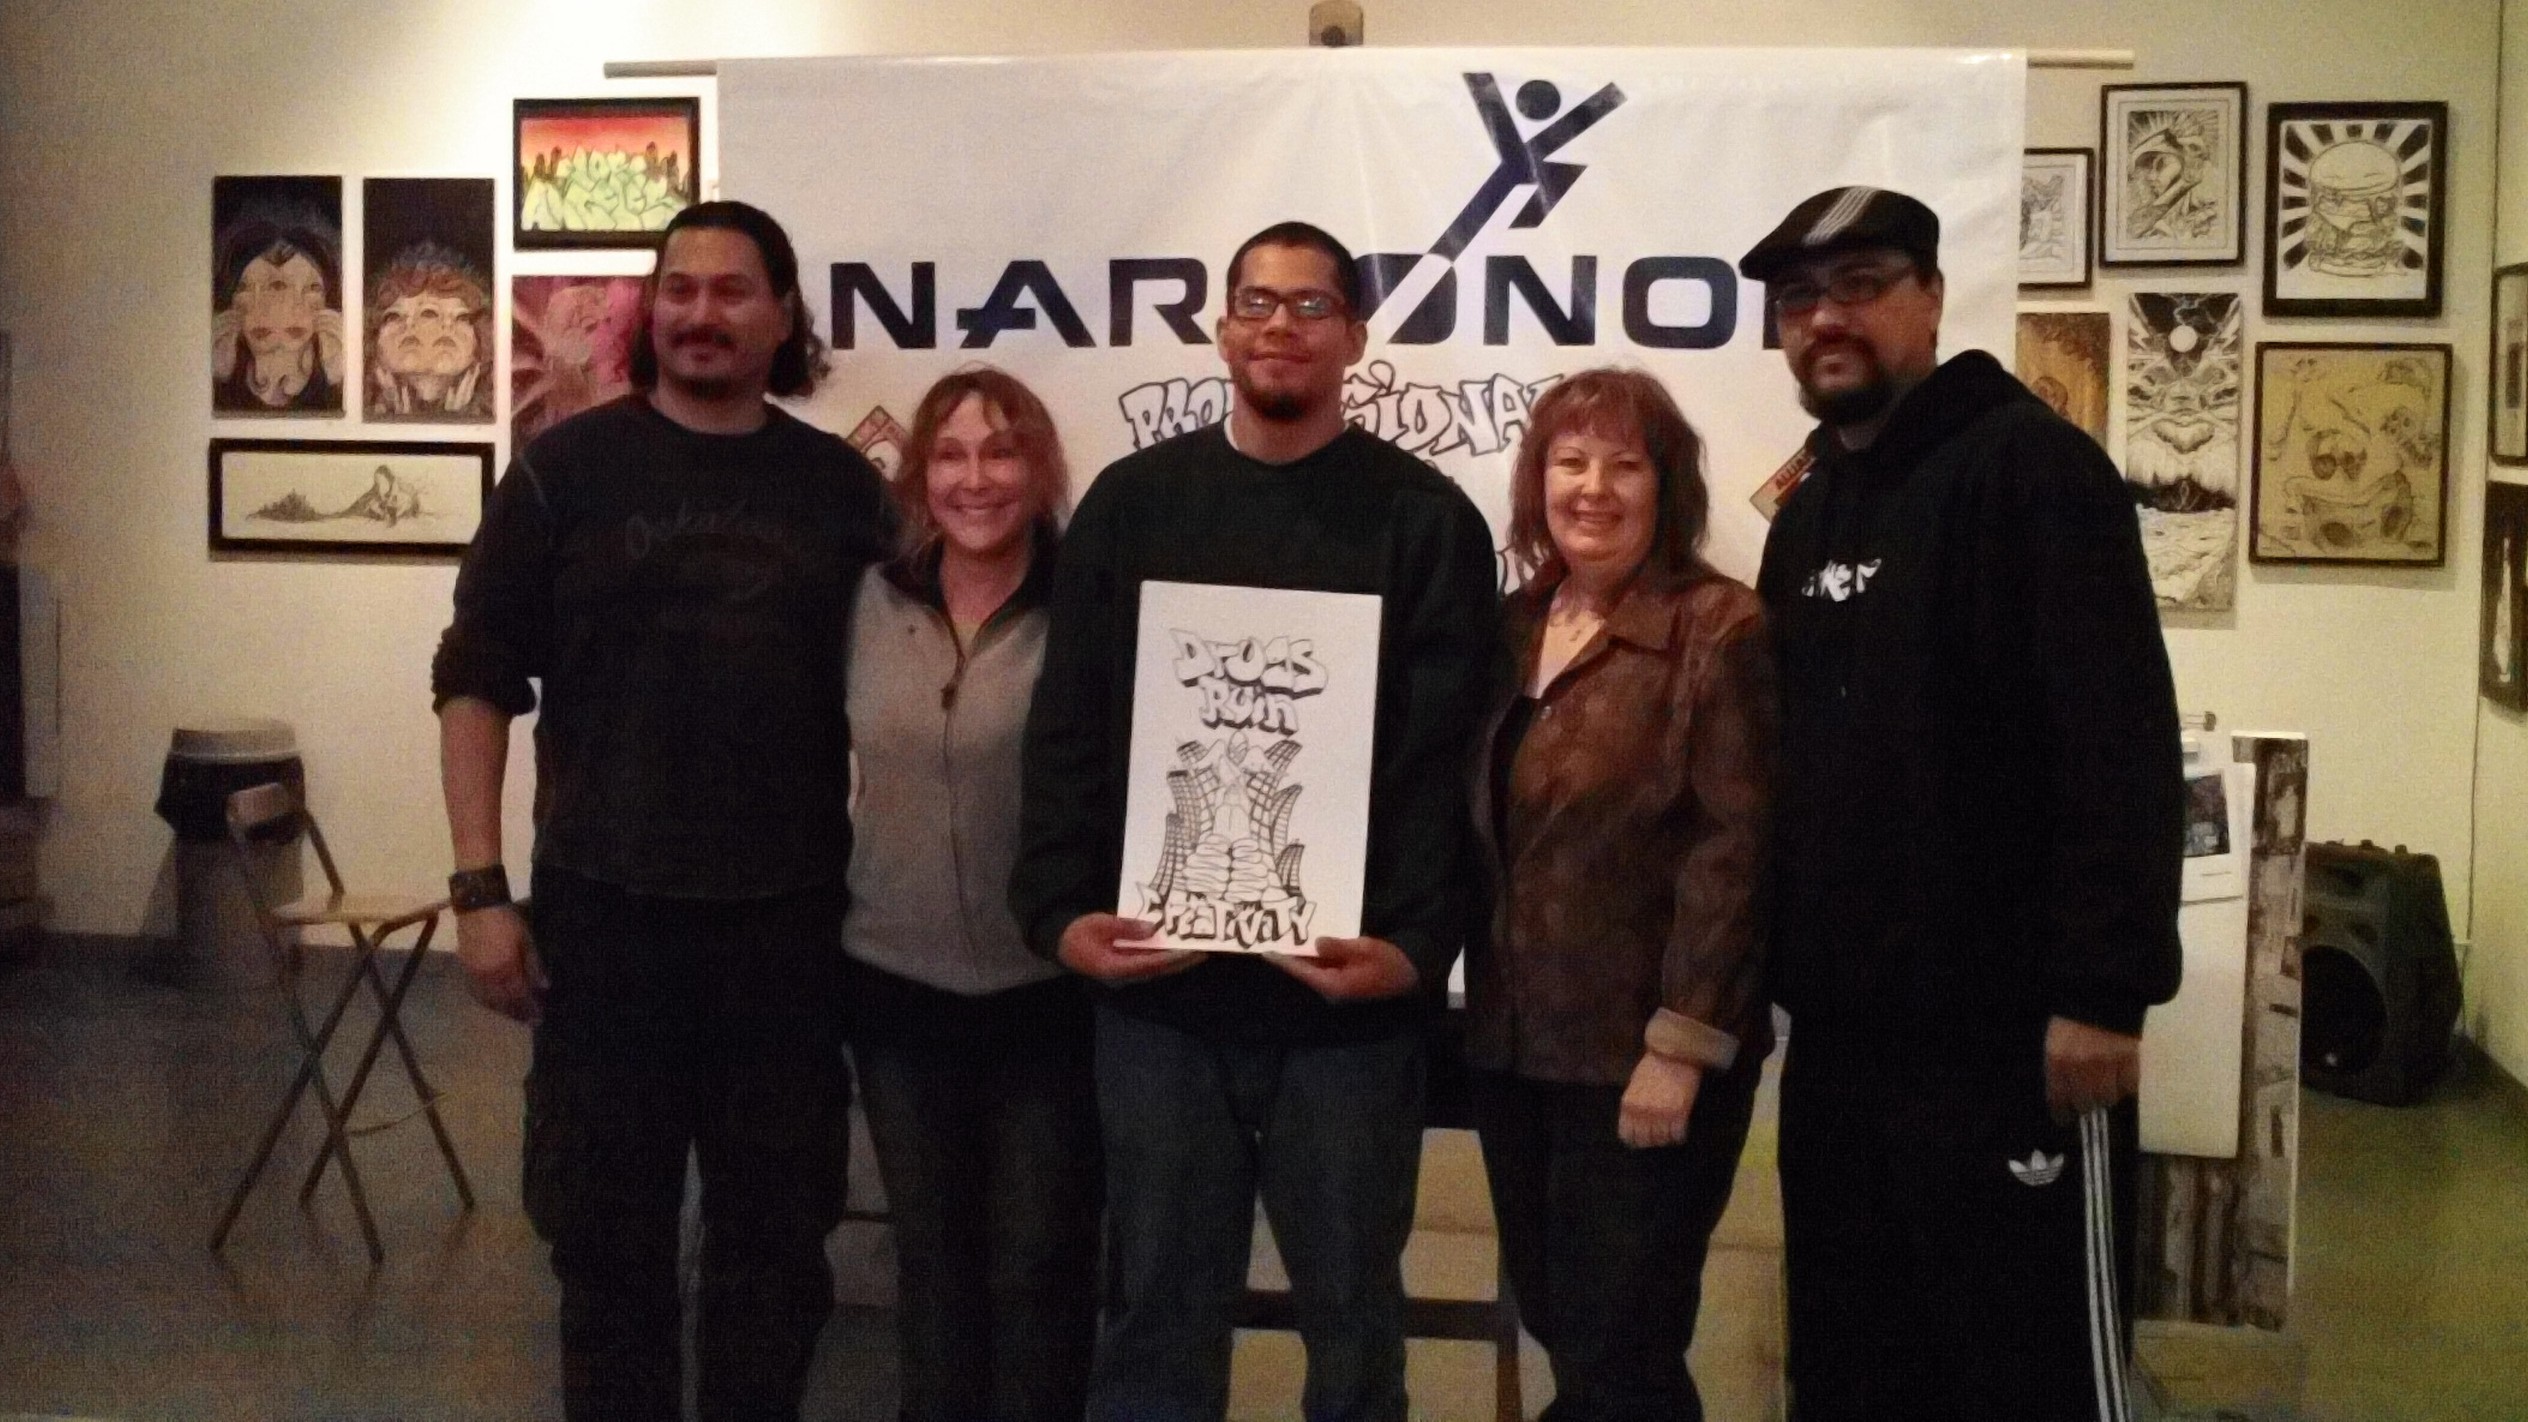 (from left) judges, Gino Montesinos, writer actor, Heidi Lemmon, President National Skateboard Association, Graff Battle Winner, Tony Anguiano, Exec Dir., Narconon Professional Drug Prevention, Teddy Chambers, judge and owner Crewest Gallery, Man One    